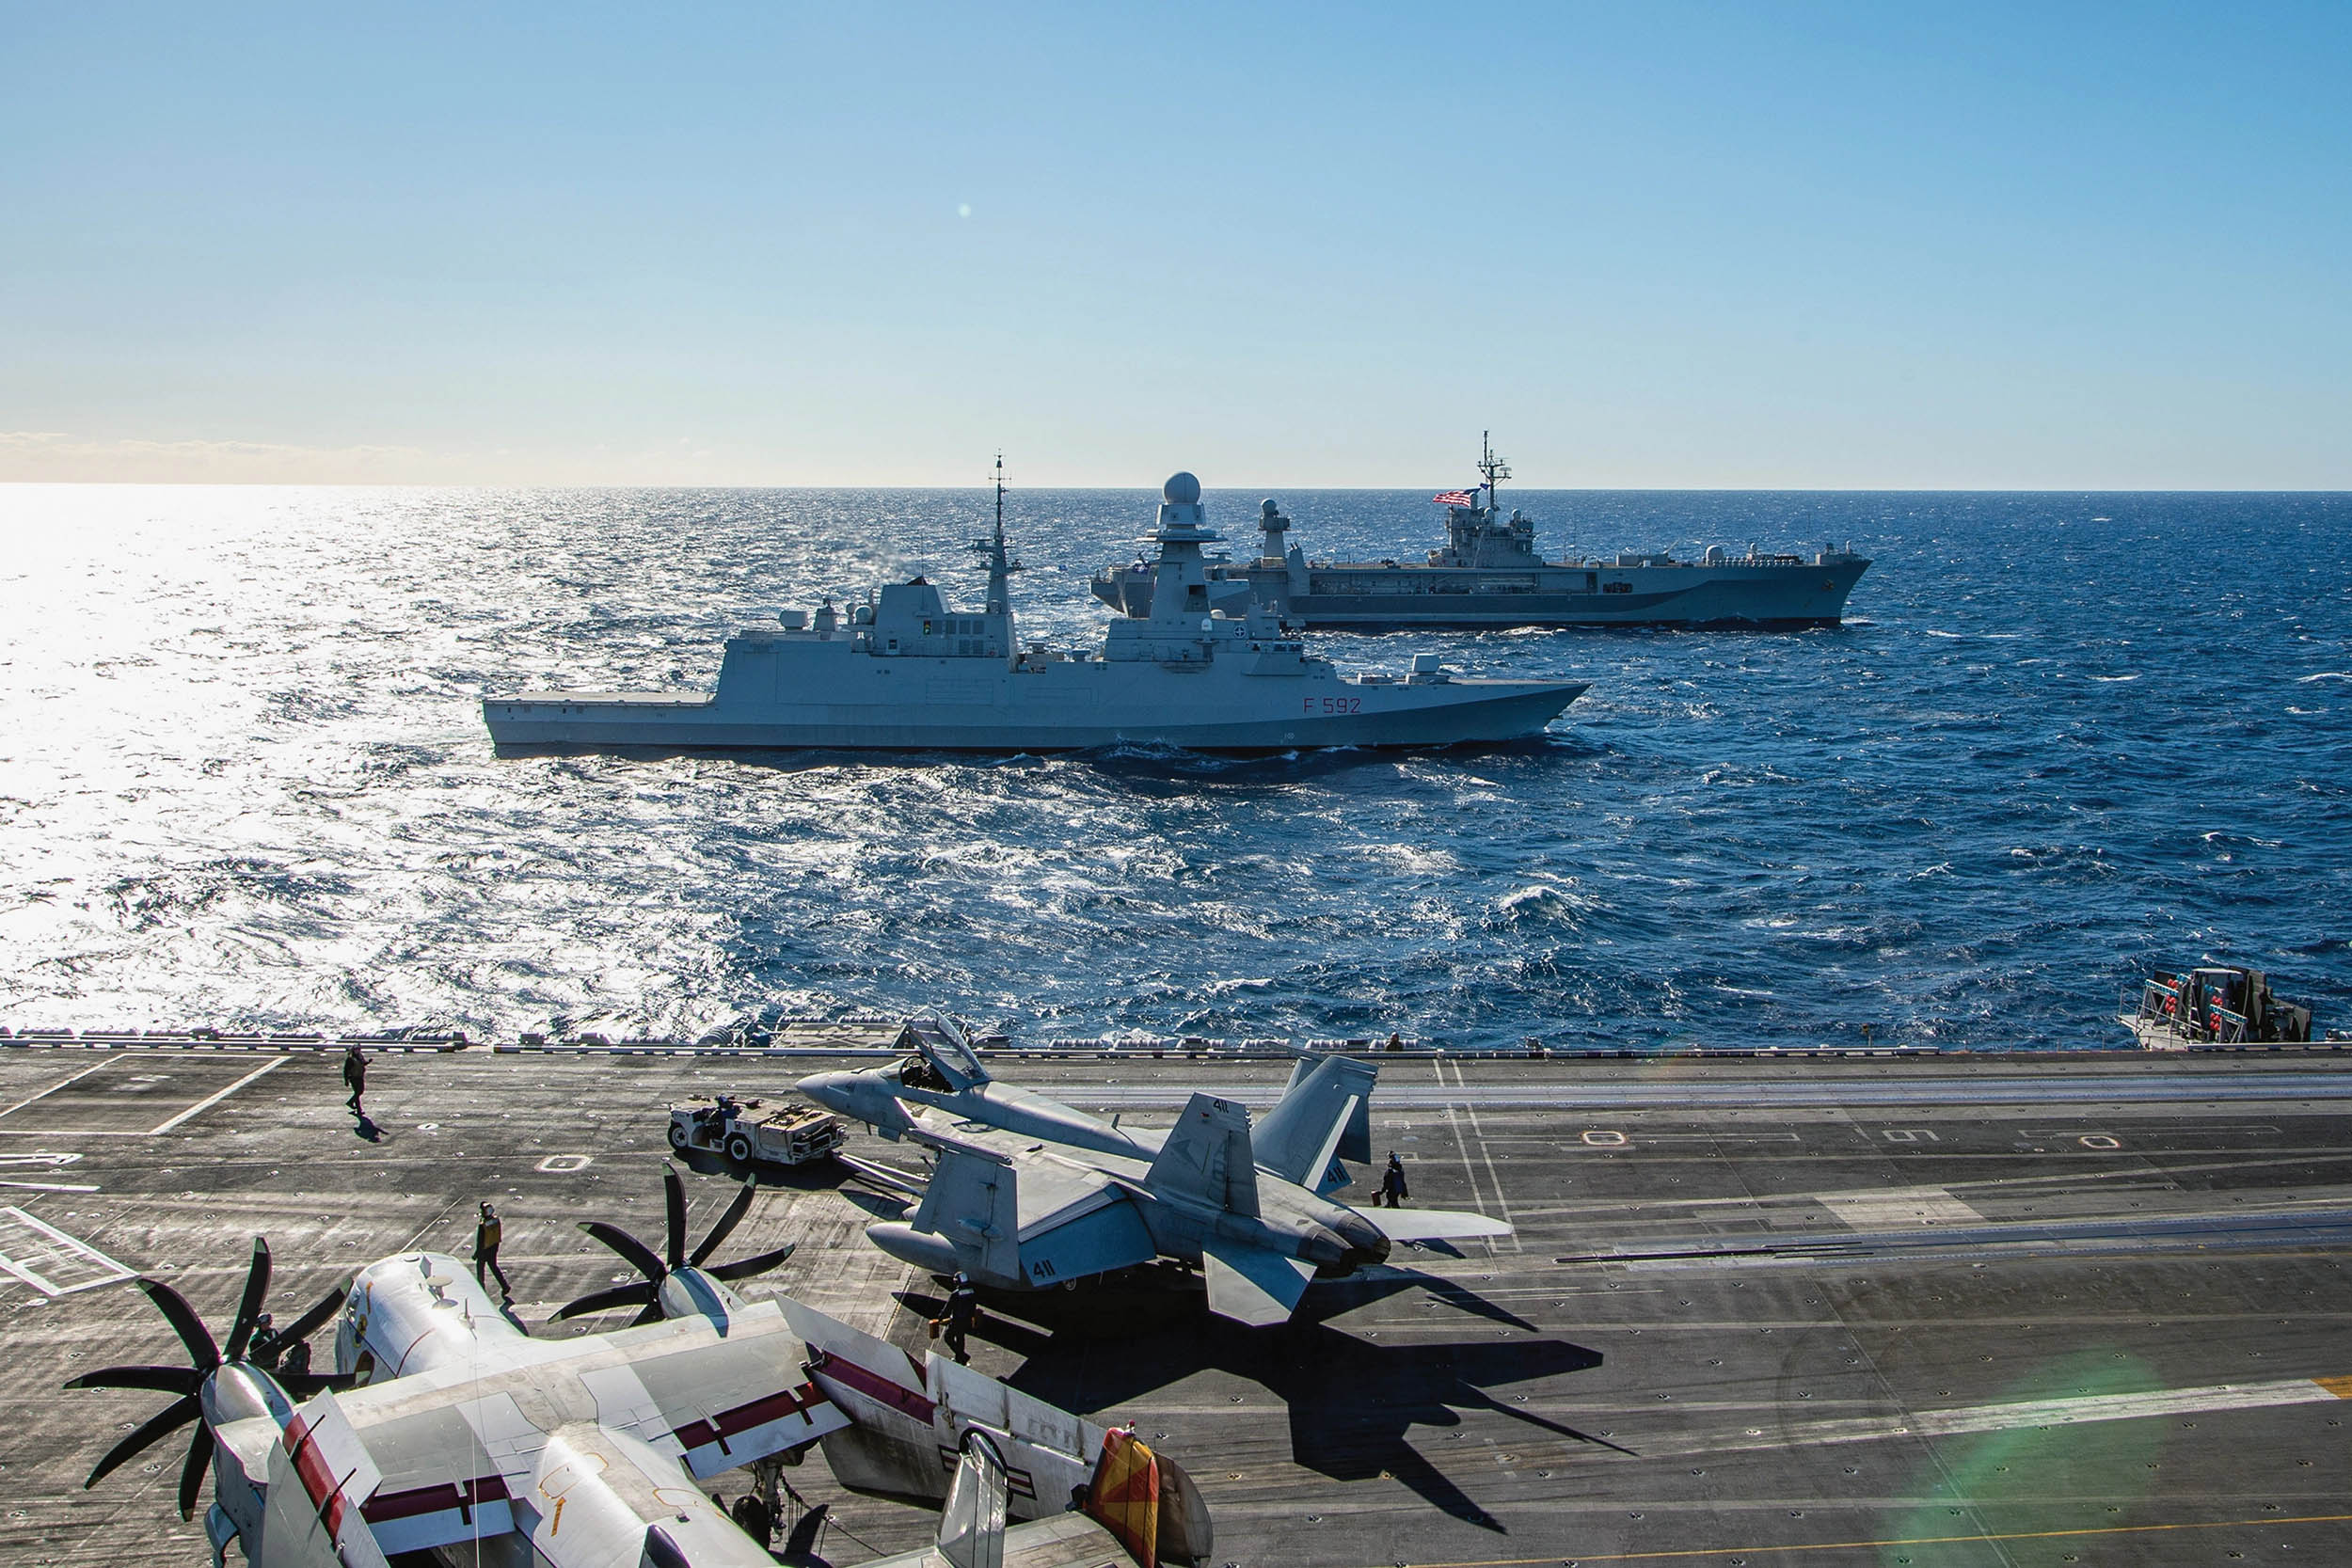 Italian navy anti-submarine frigate ITS Carlo Margottini and command and control ship USS Mount Whitney transit alongside USS Harry S.
Truman in support of Neptune Strike 22, February 2, 2022, in Adriatic Sea (U.S. Navy/Hunter Day)